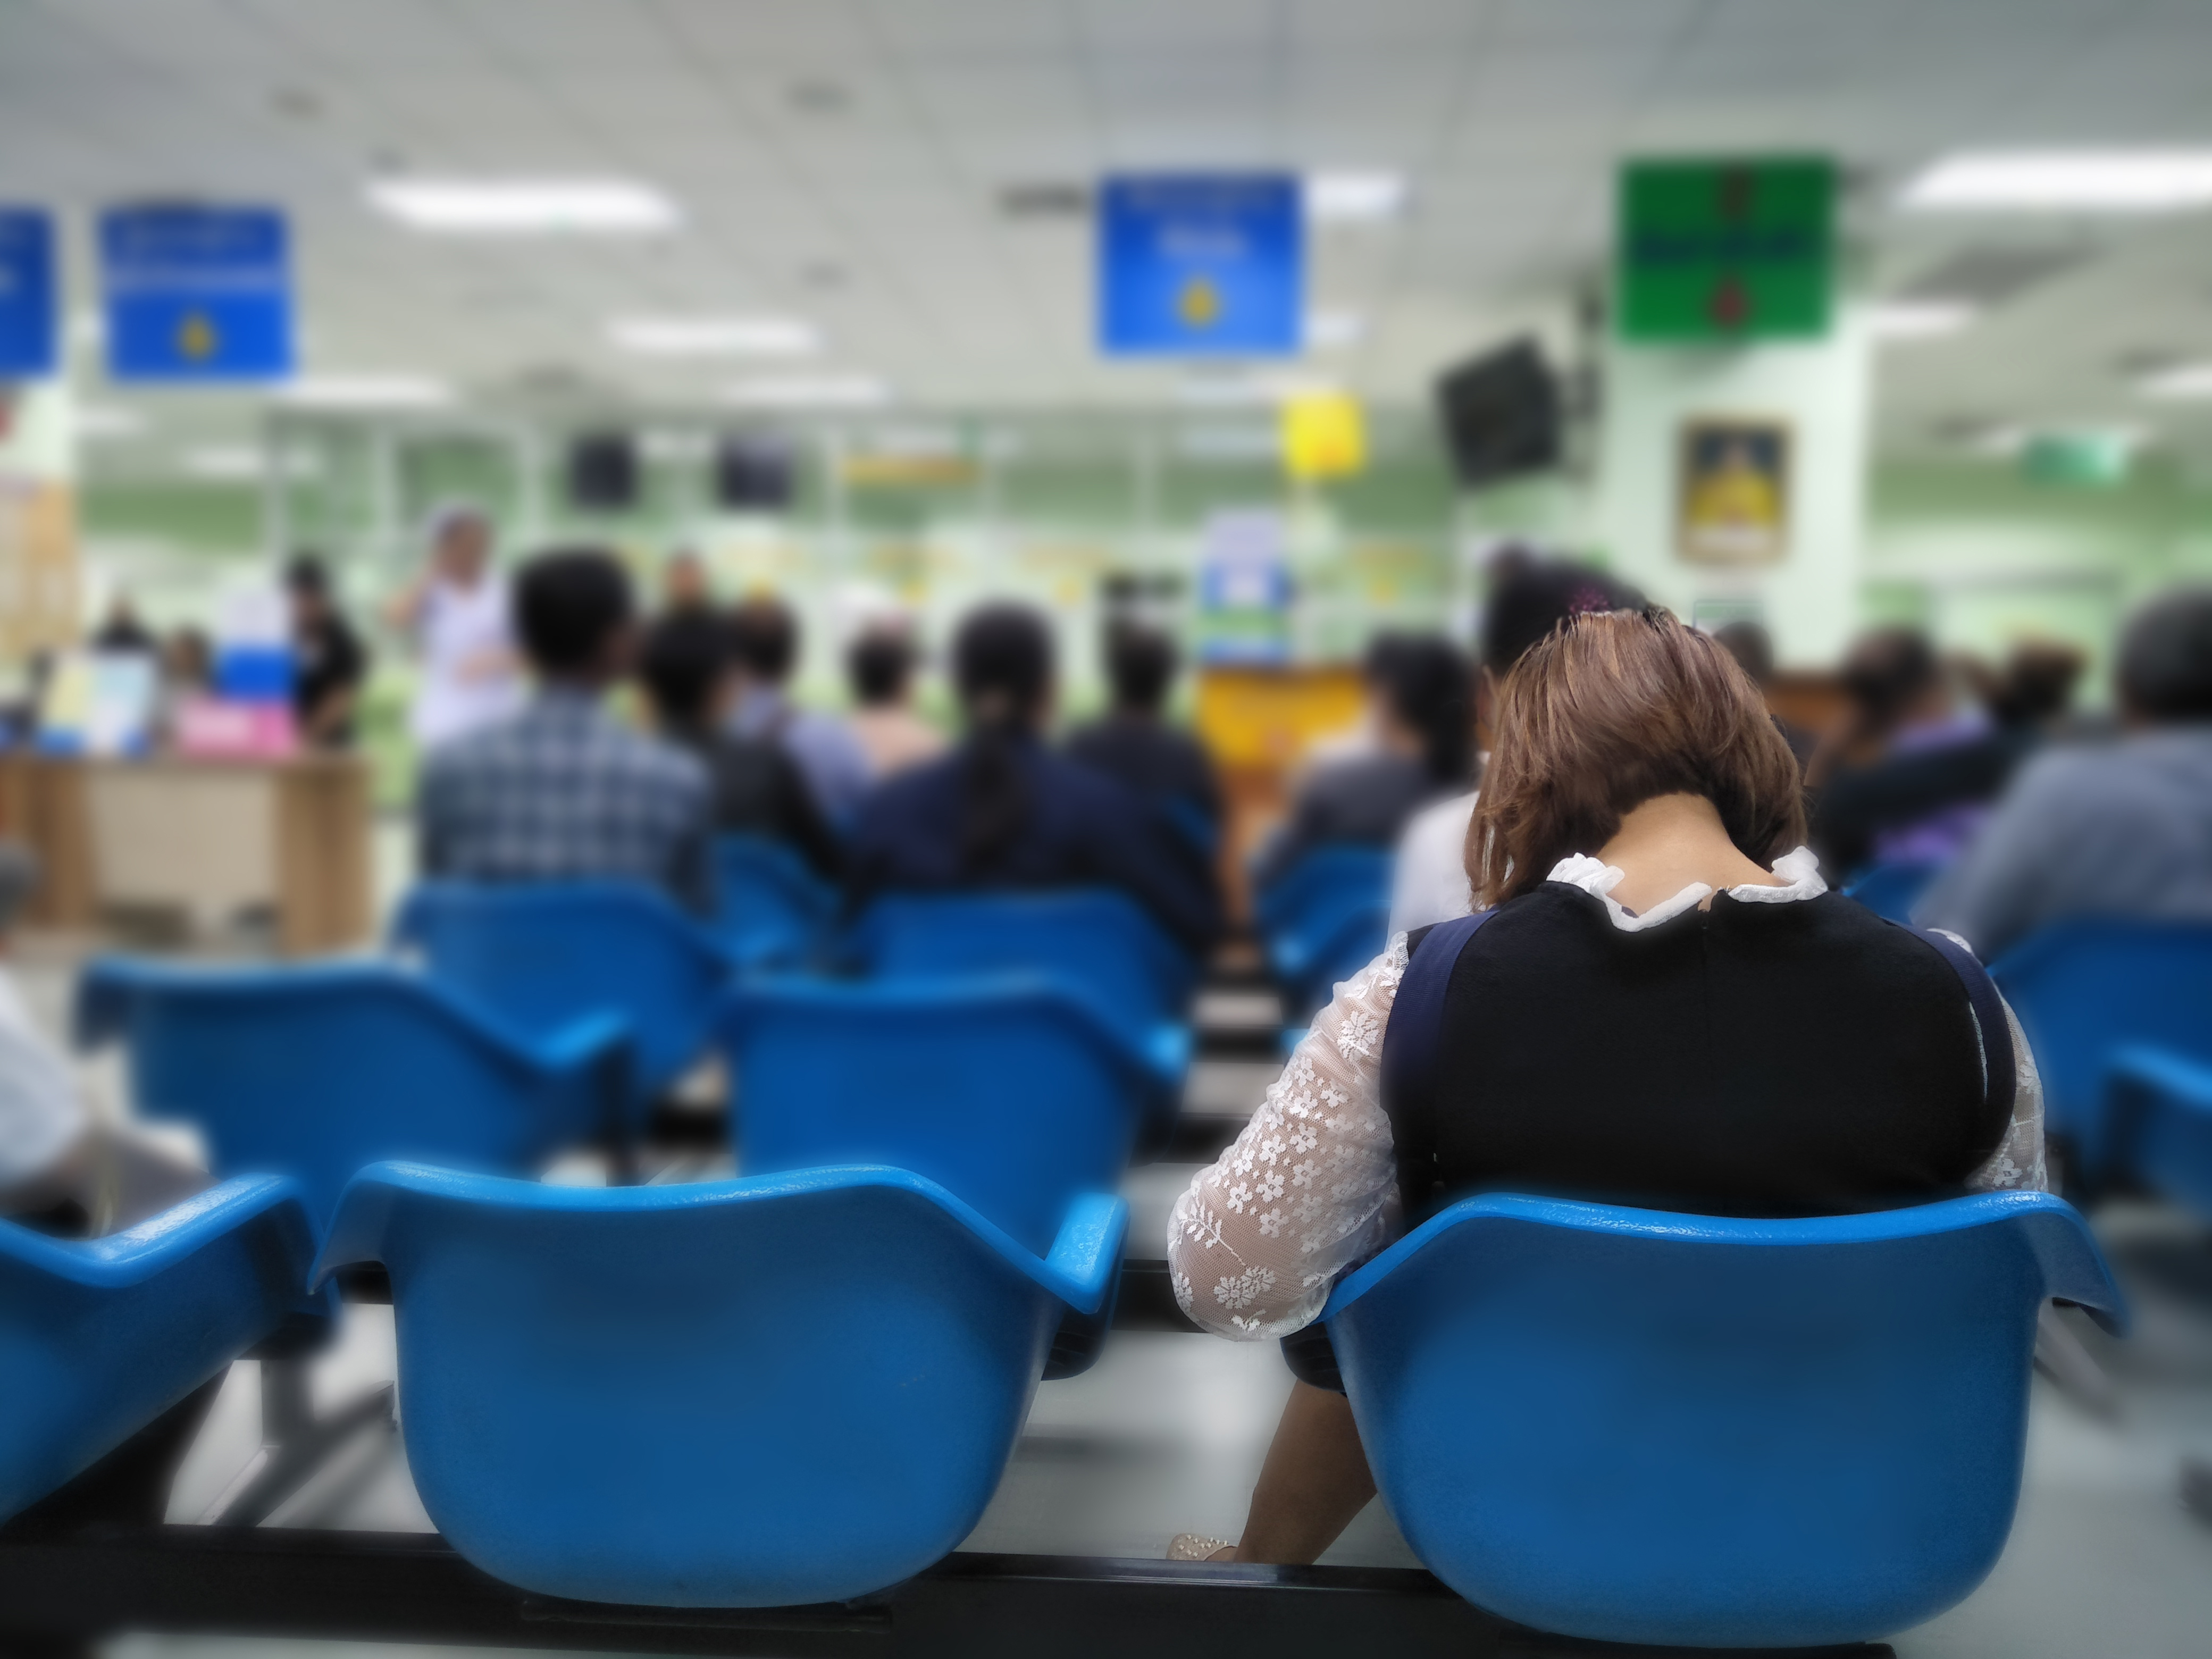 Woman and many people waiting in the hospital. | Source: Shutterstock